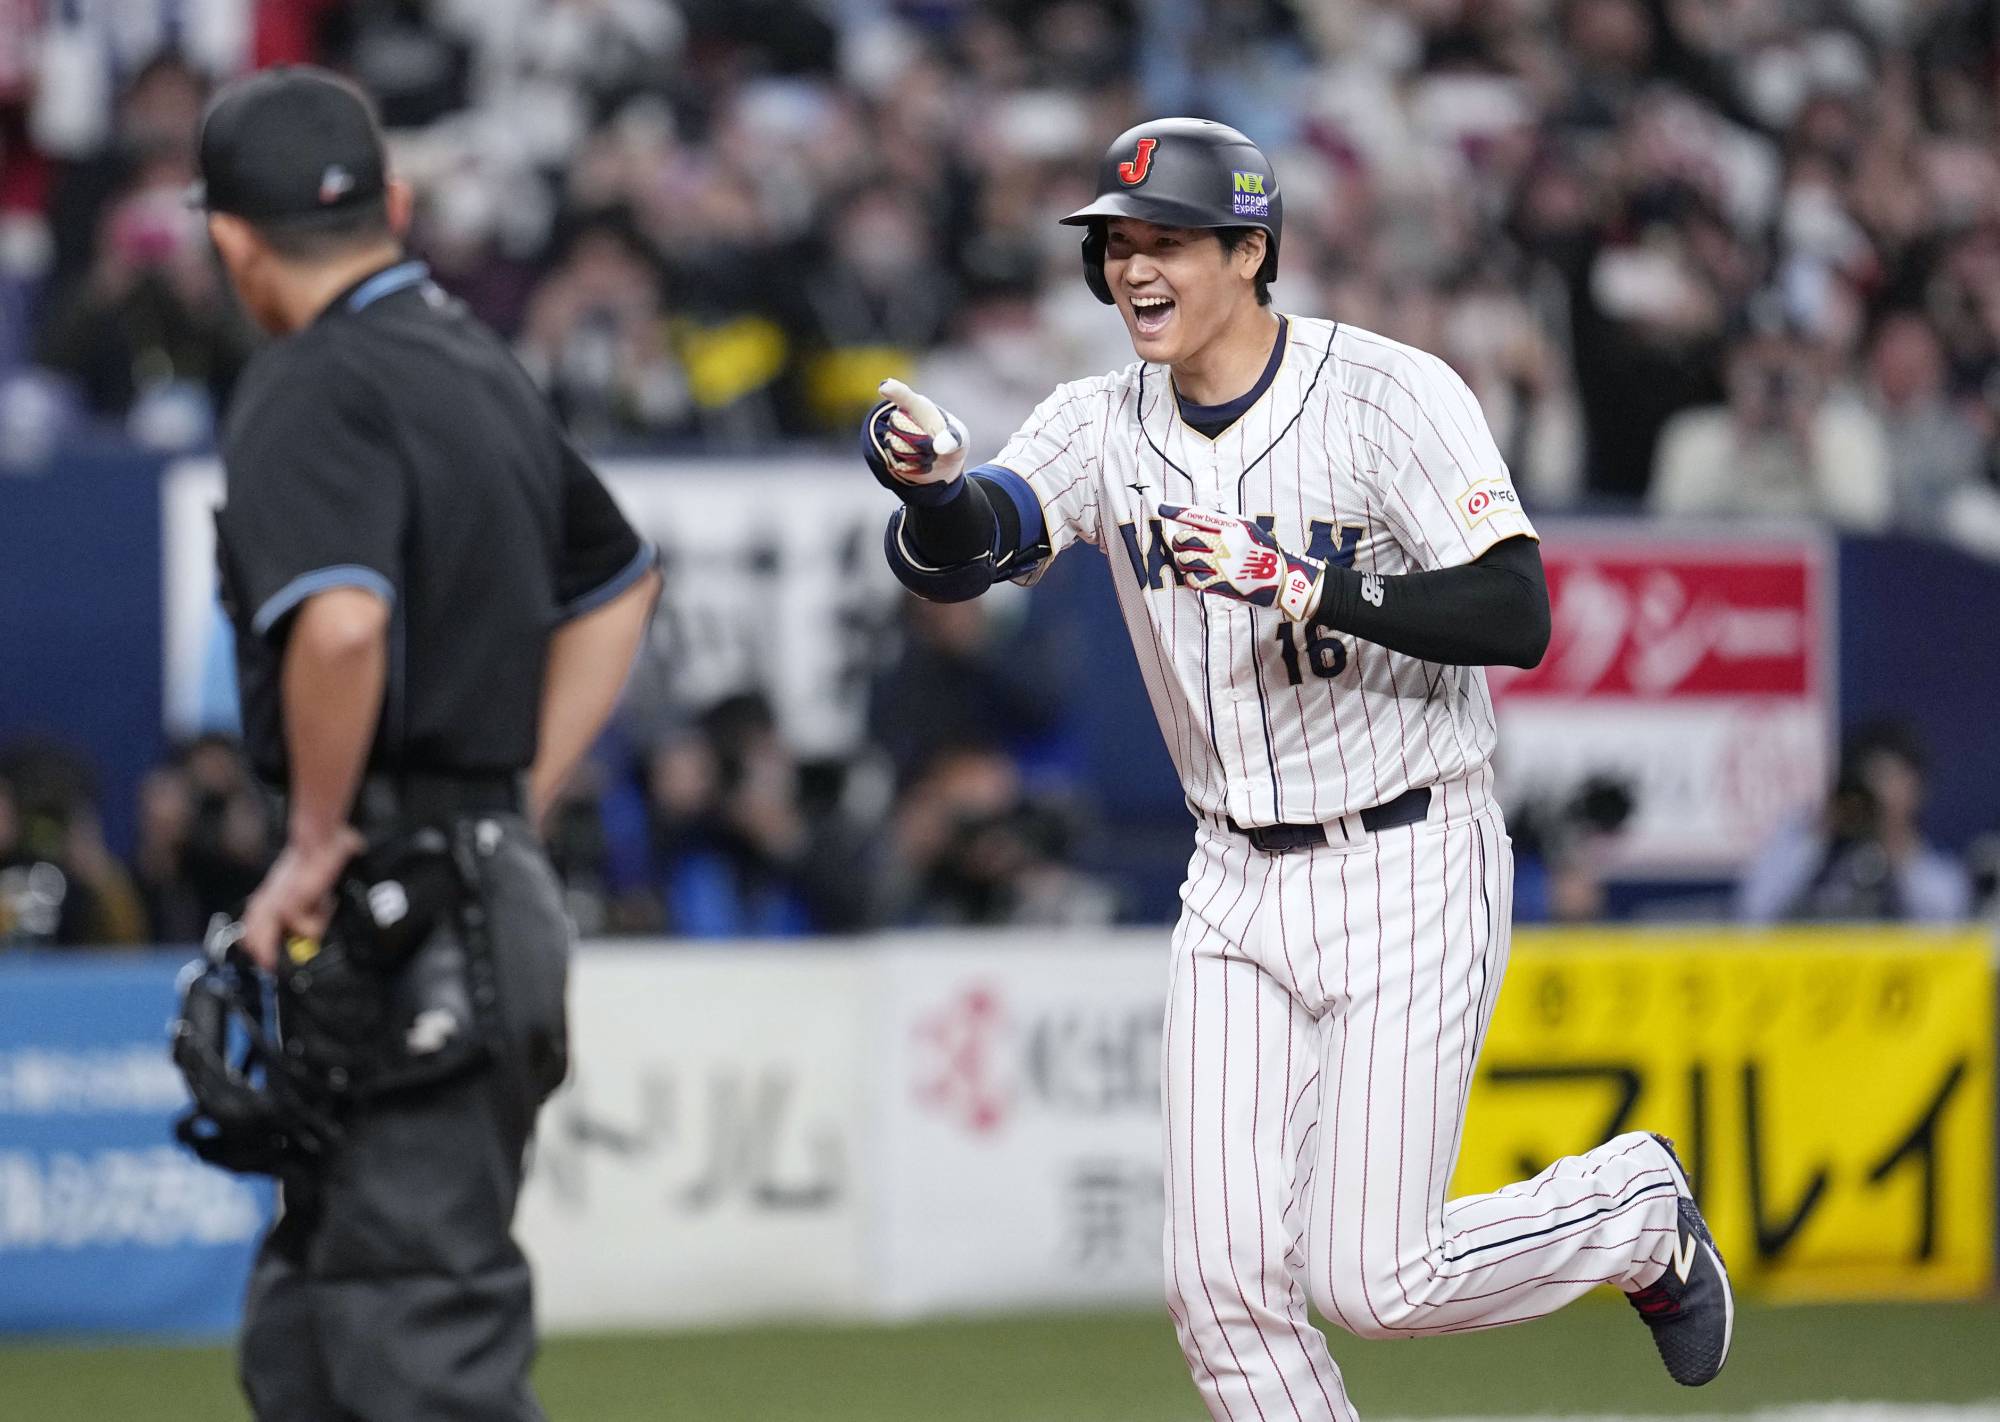 Shohei Ohtani thrills fans with two homers as Japan beats Hanshin in WBC warmup